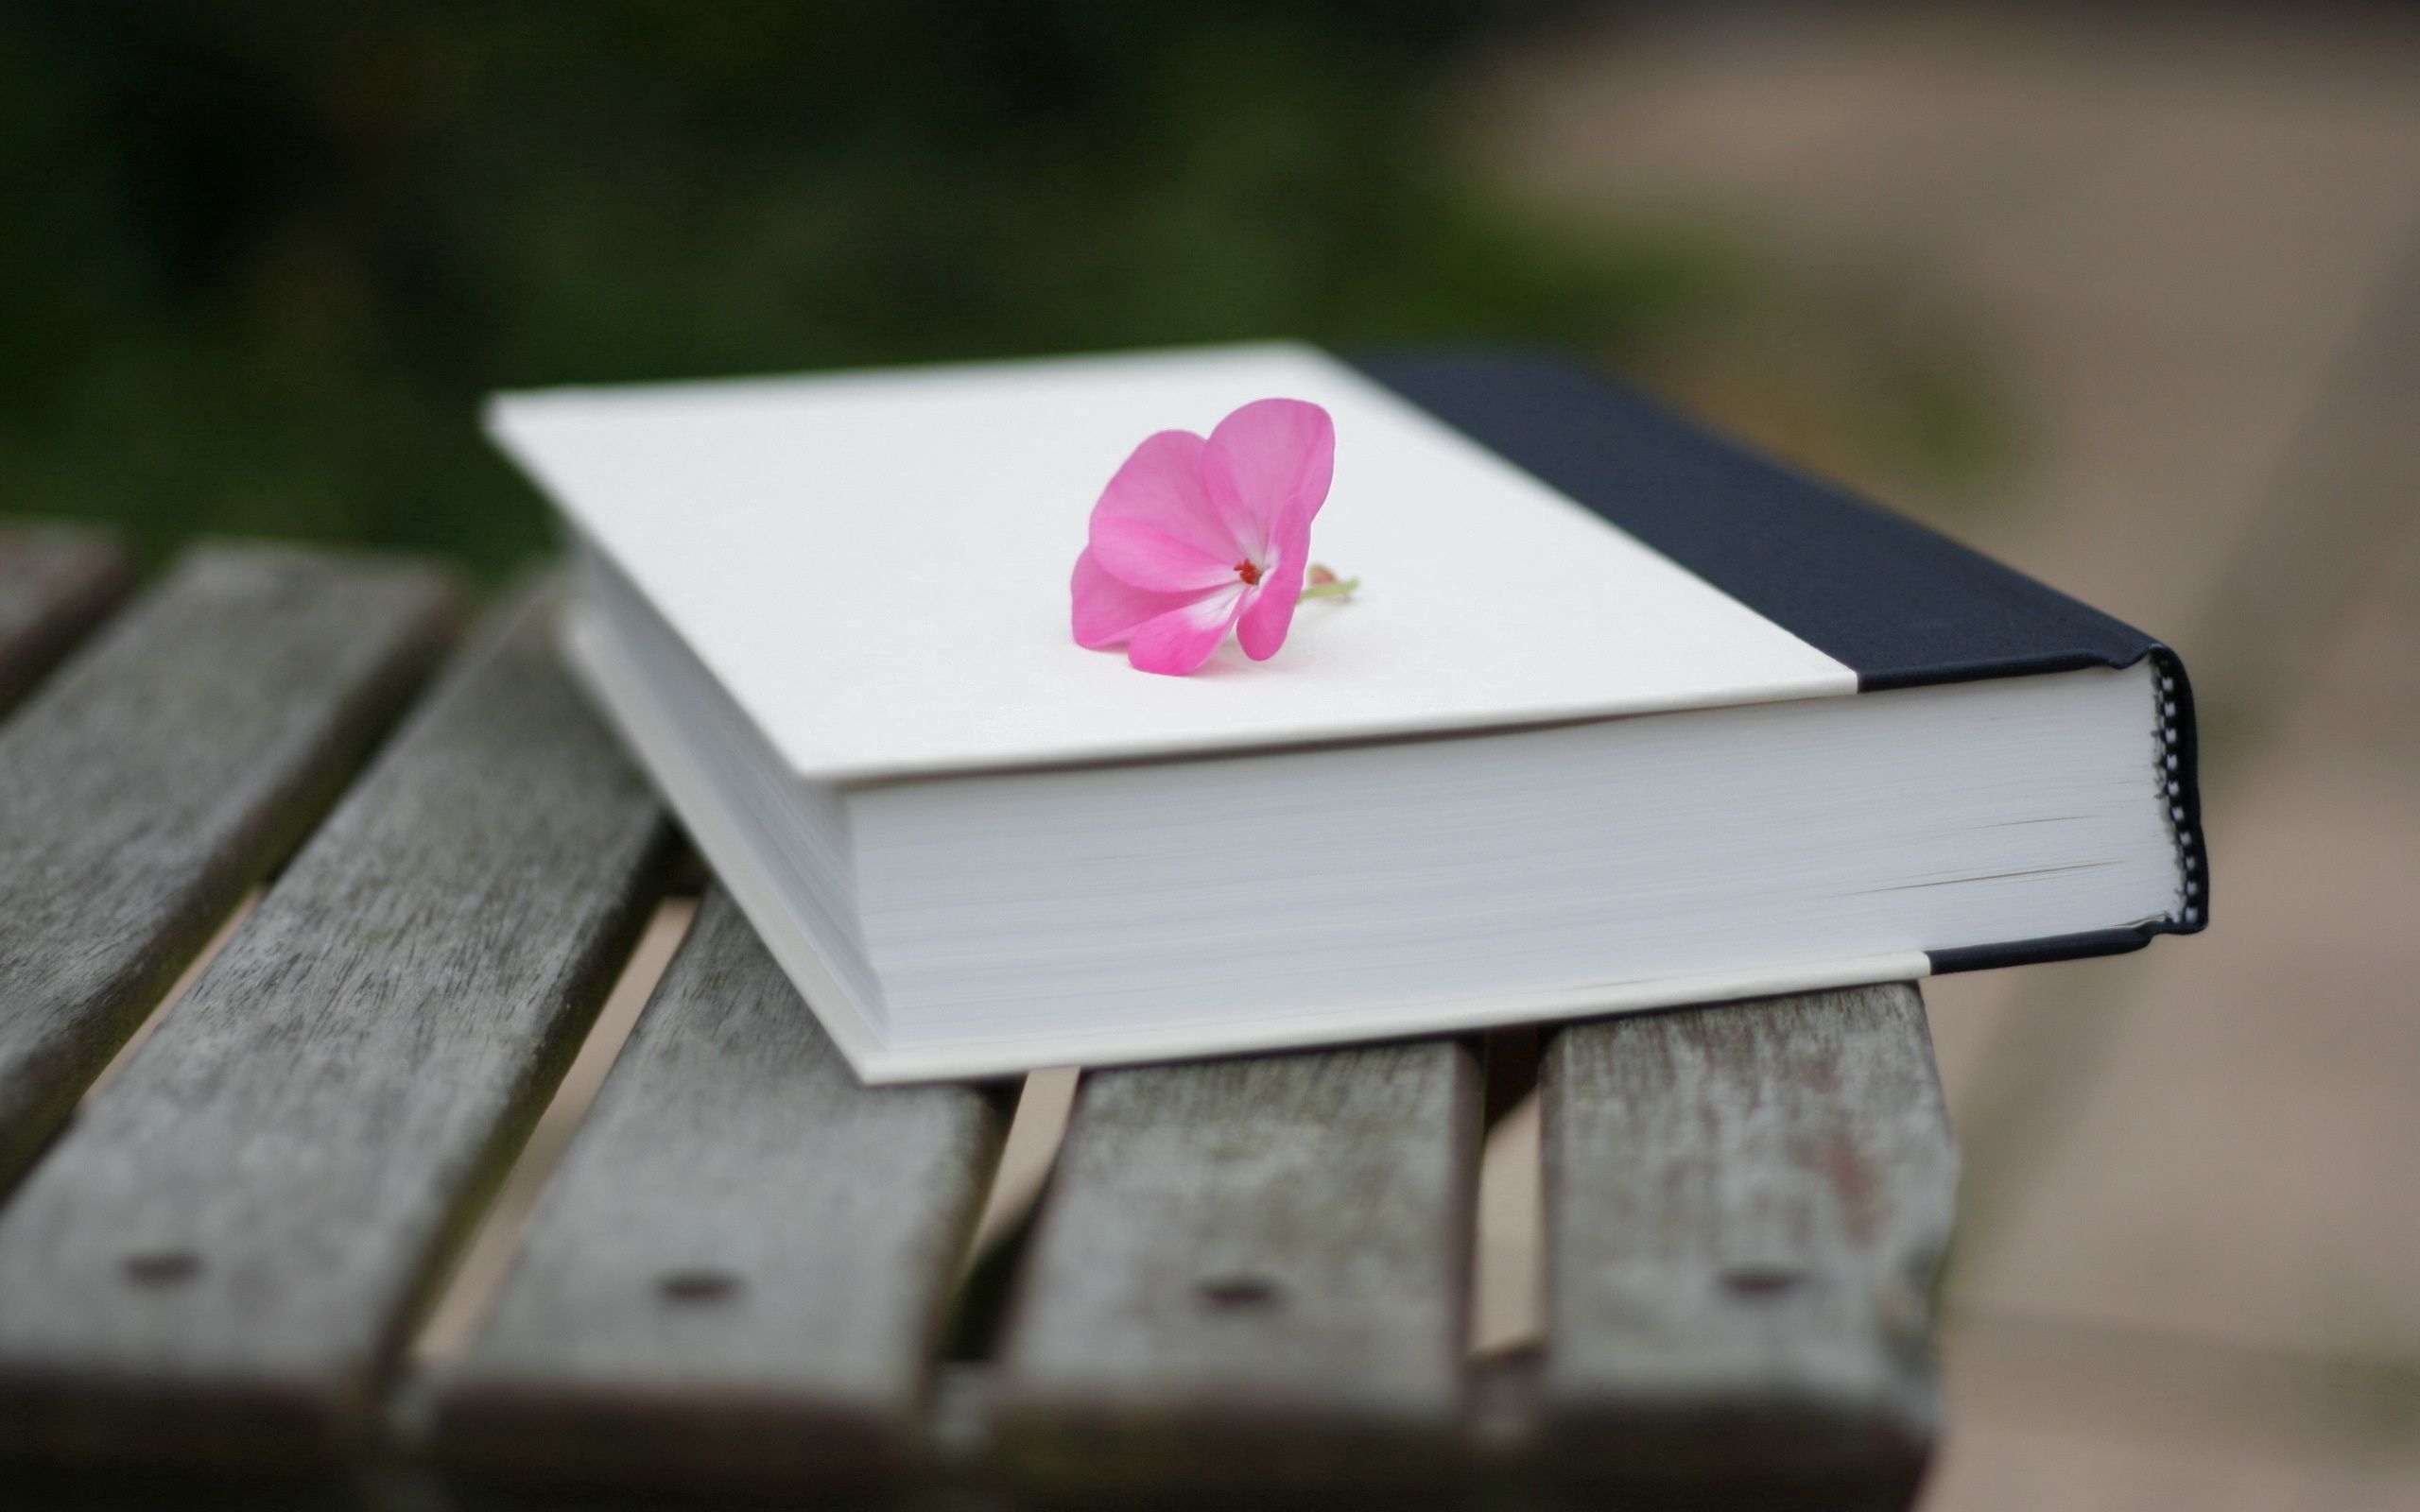 smooth, flower, miscellanea, miscellaneous, blur, book, bench, handsomely, it's beautiful for Windows